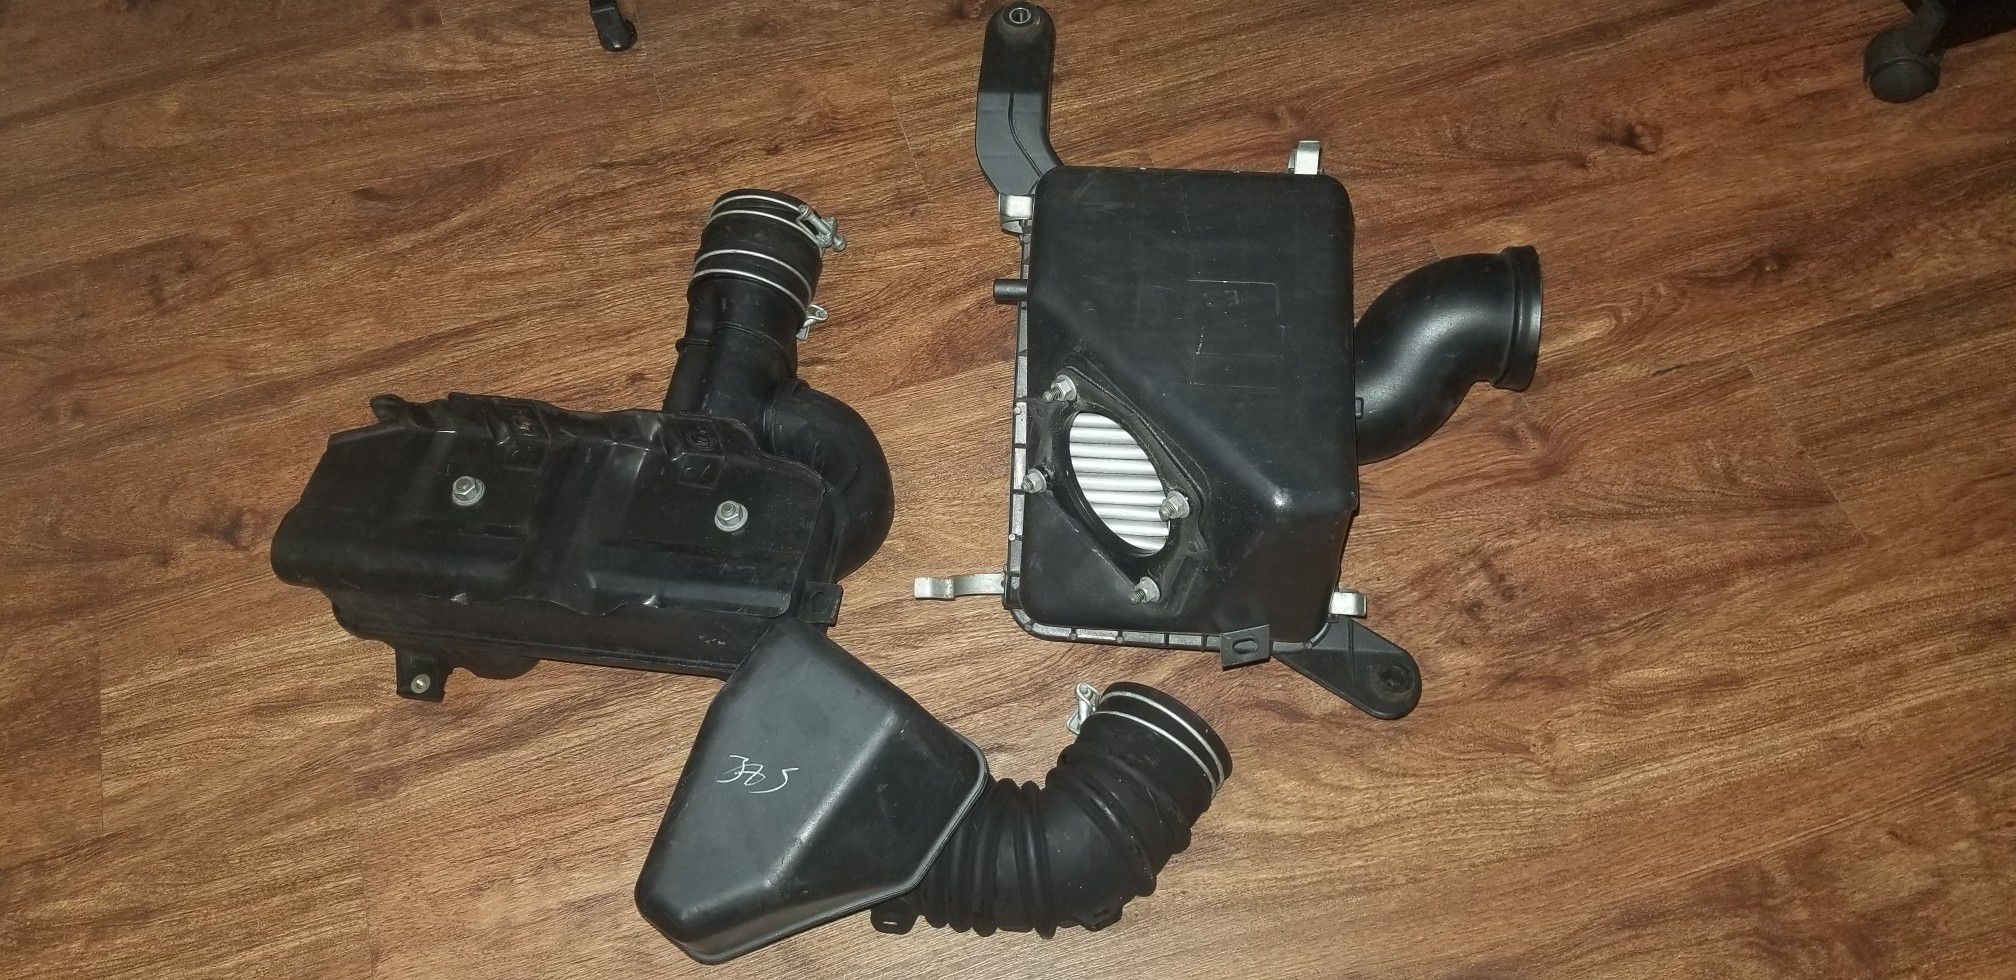 Free Toyota tacoma 2003 air intake system original OBO, making space on my house need to get rid of it or is going to the trash.FREE